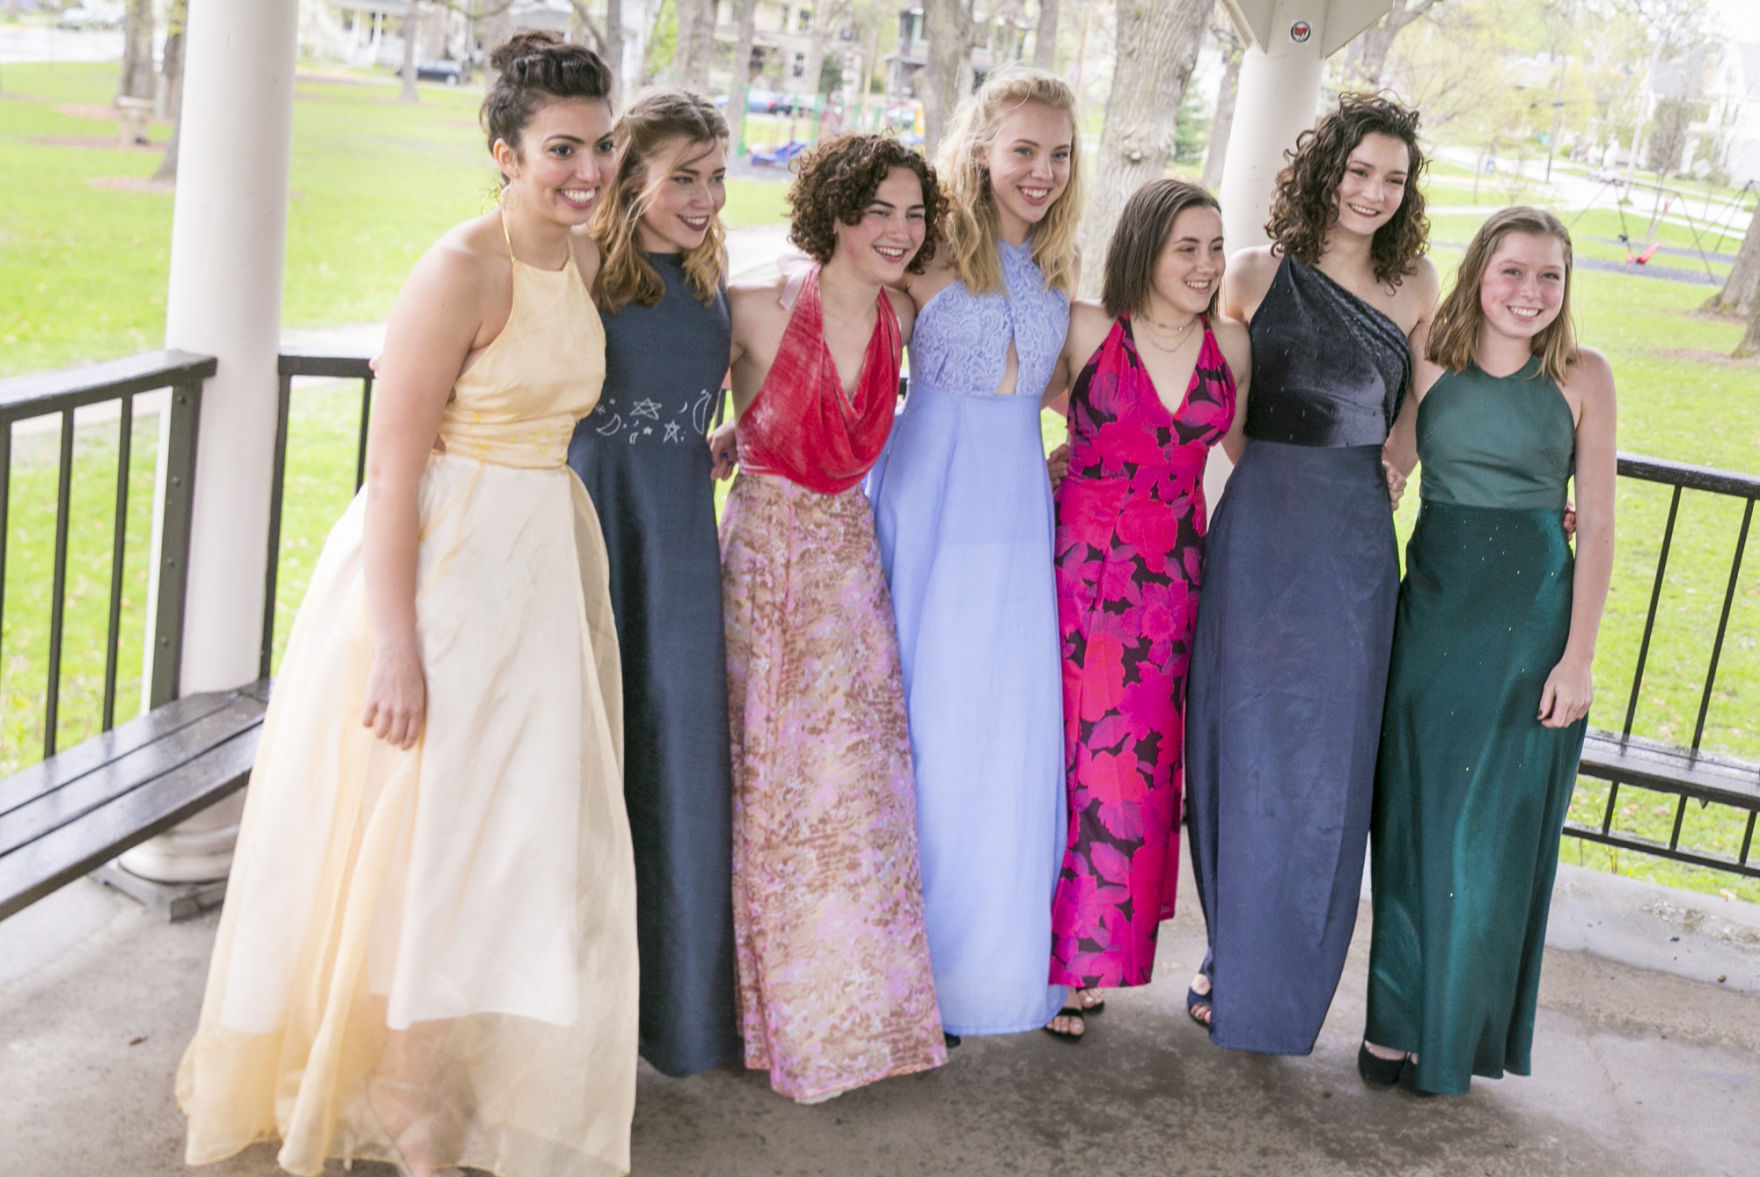 Prom Dresses for Friends